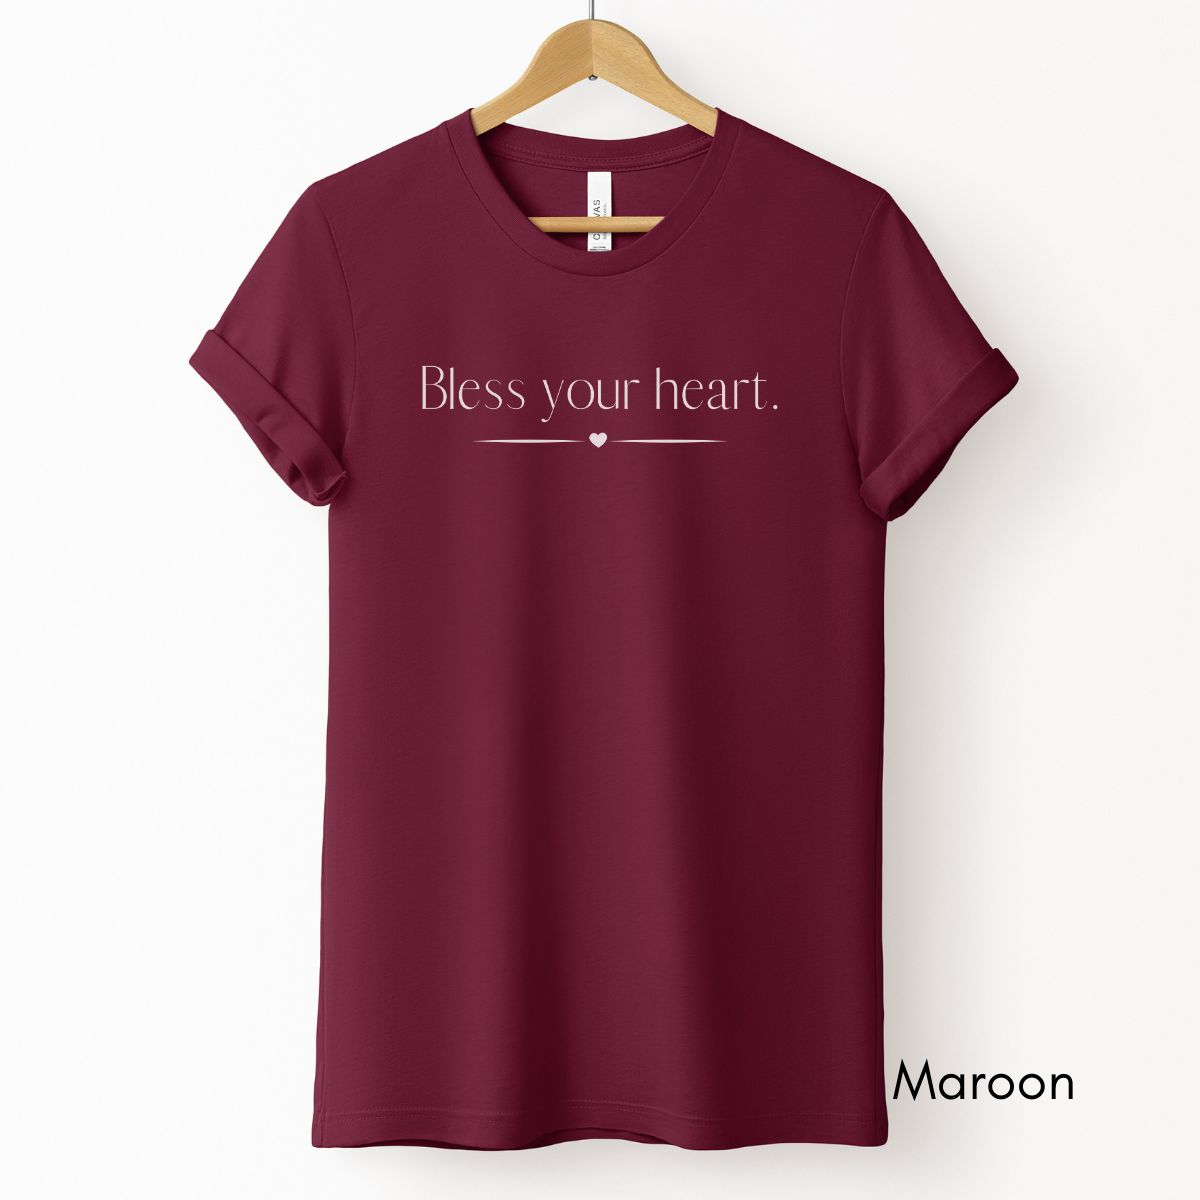 Bless Your Heart Tee | Unisex Jersey Short Sleeve Tee | Southern Life T-shirt | Southern Sayings Tee | Funny Southern Tshirt